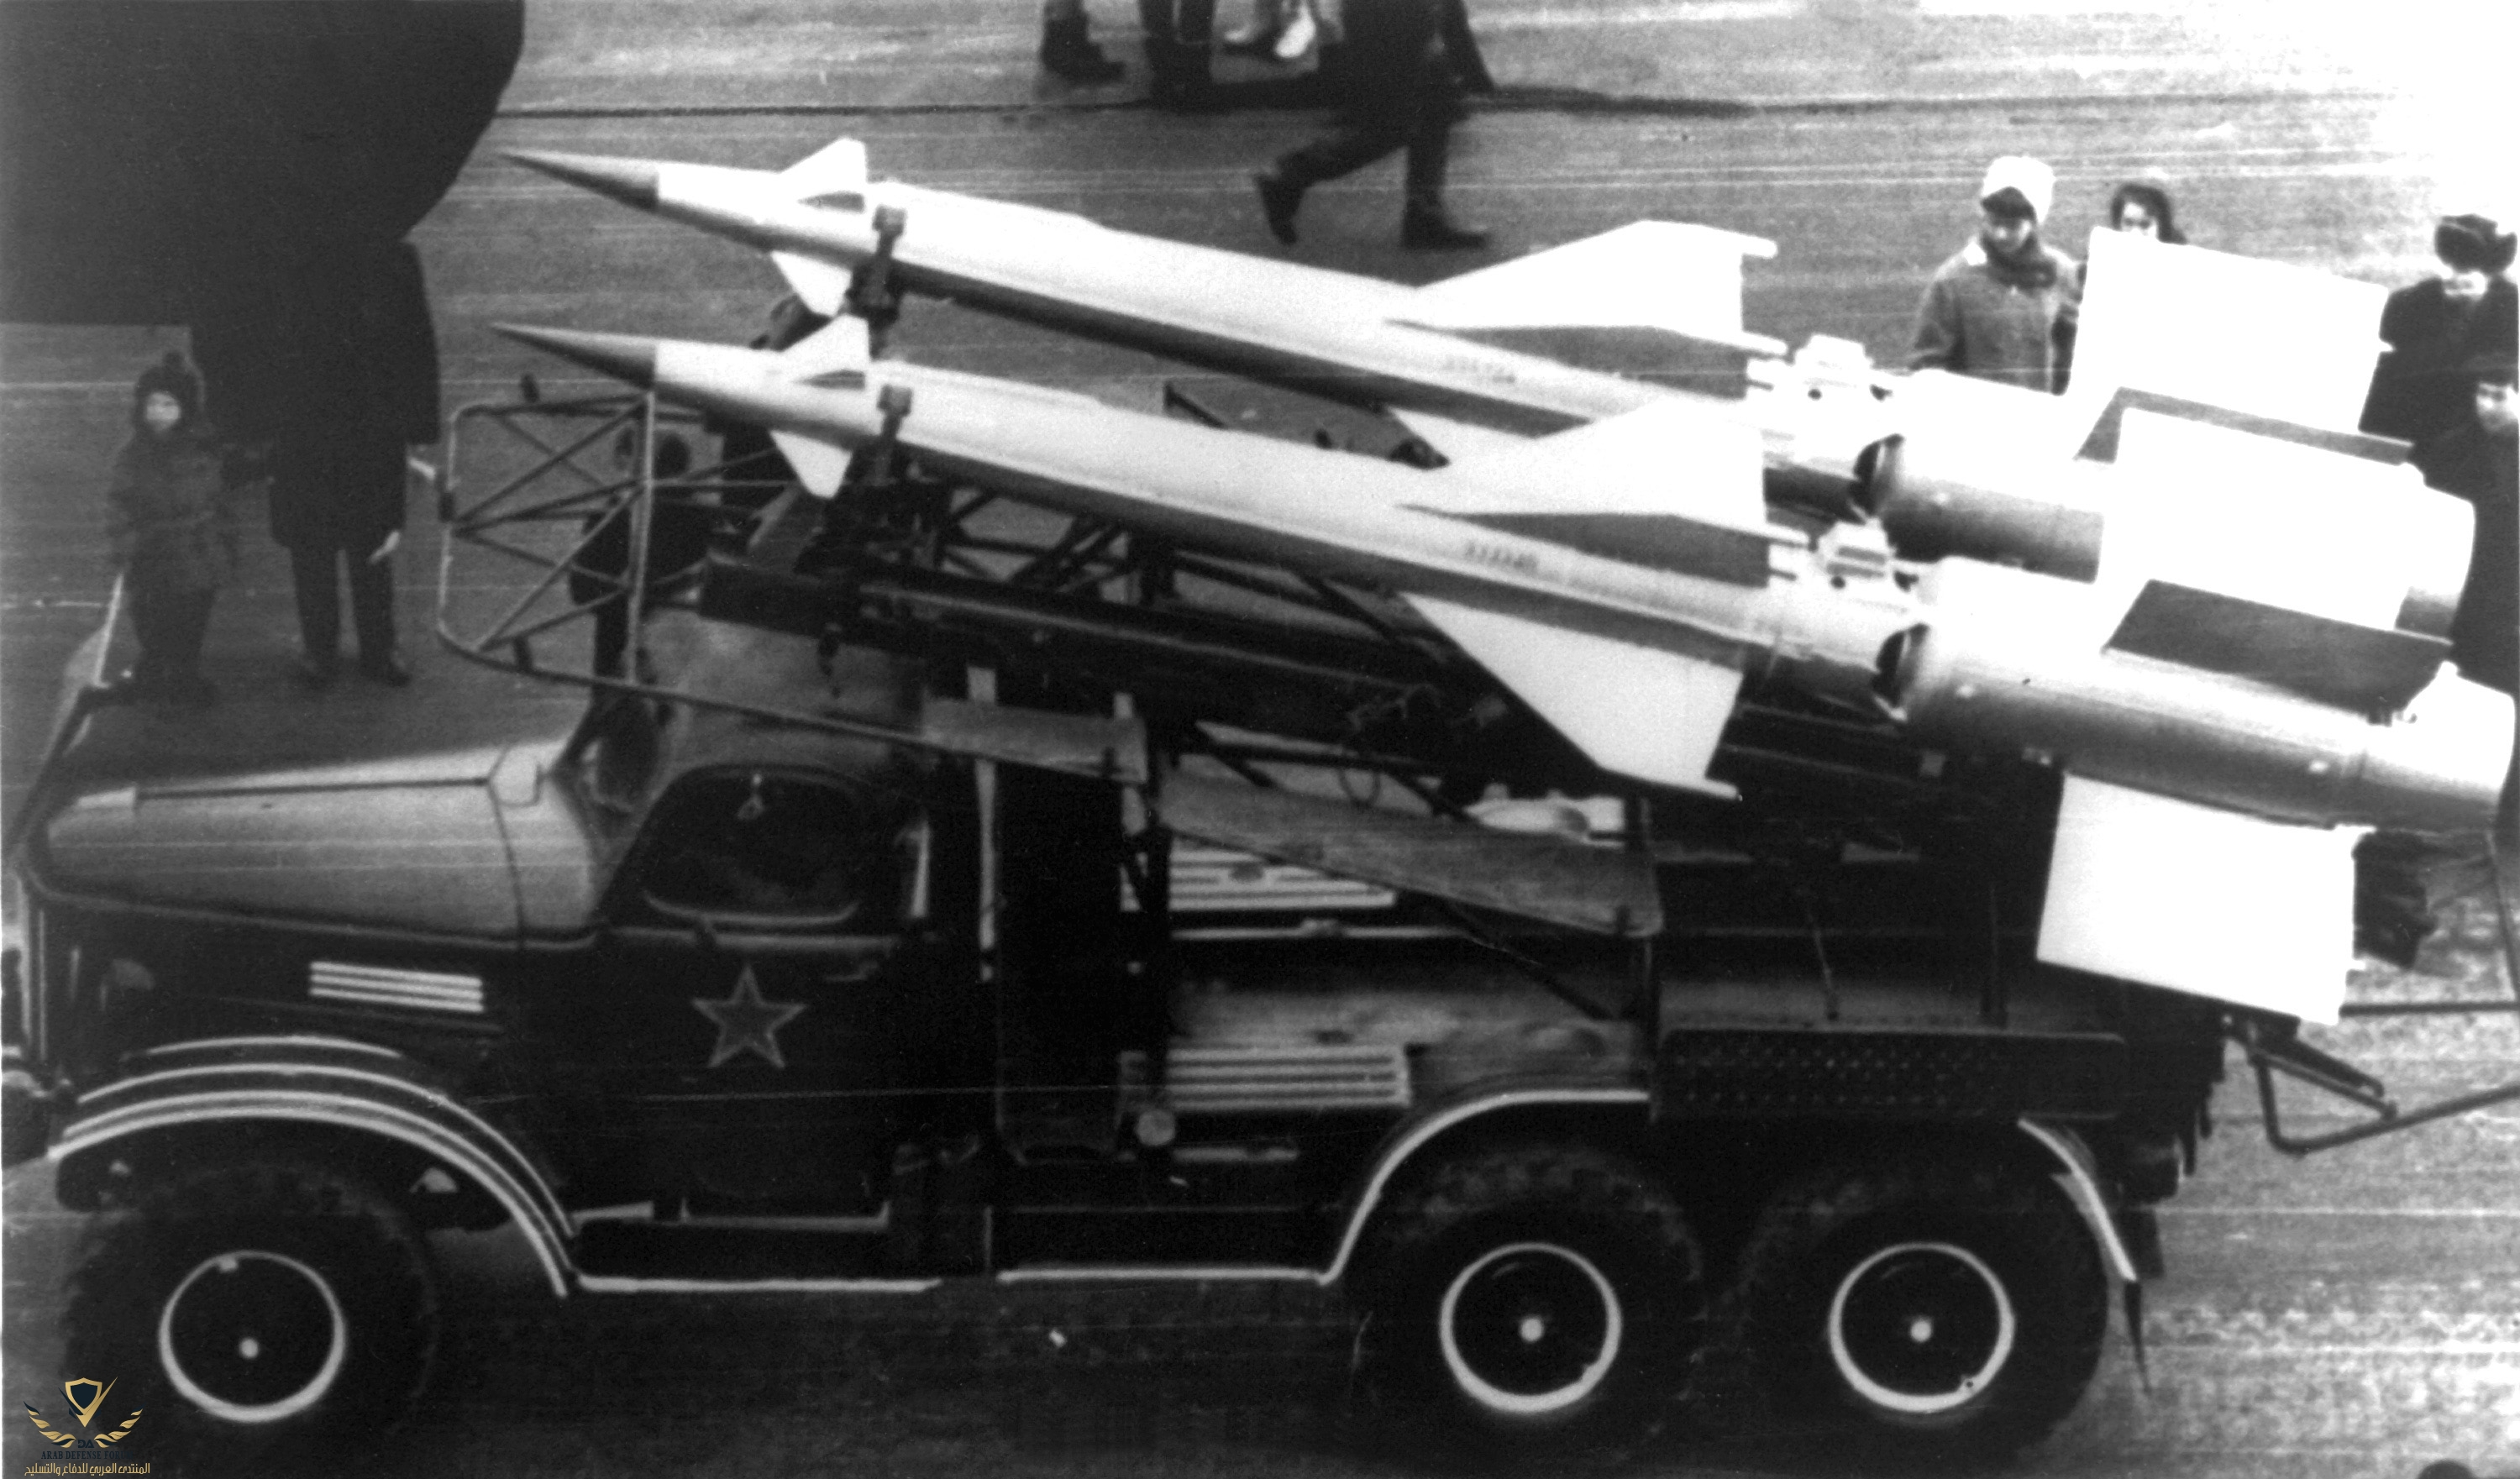 Pair_of_S-125_missiles_in_transit_on_a_truck.jpg